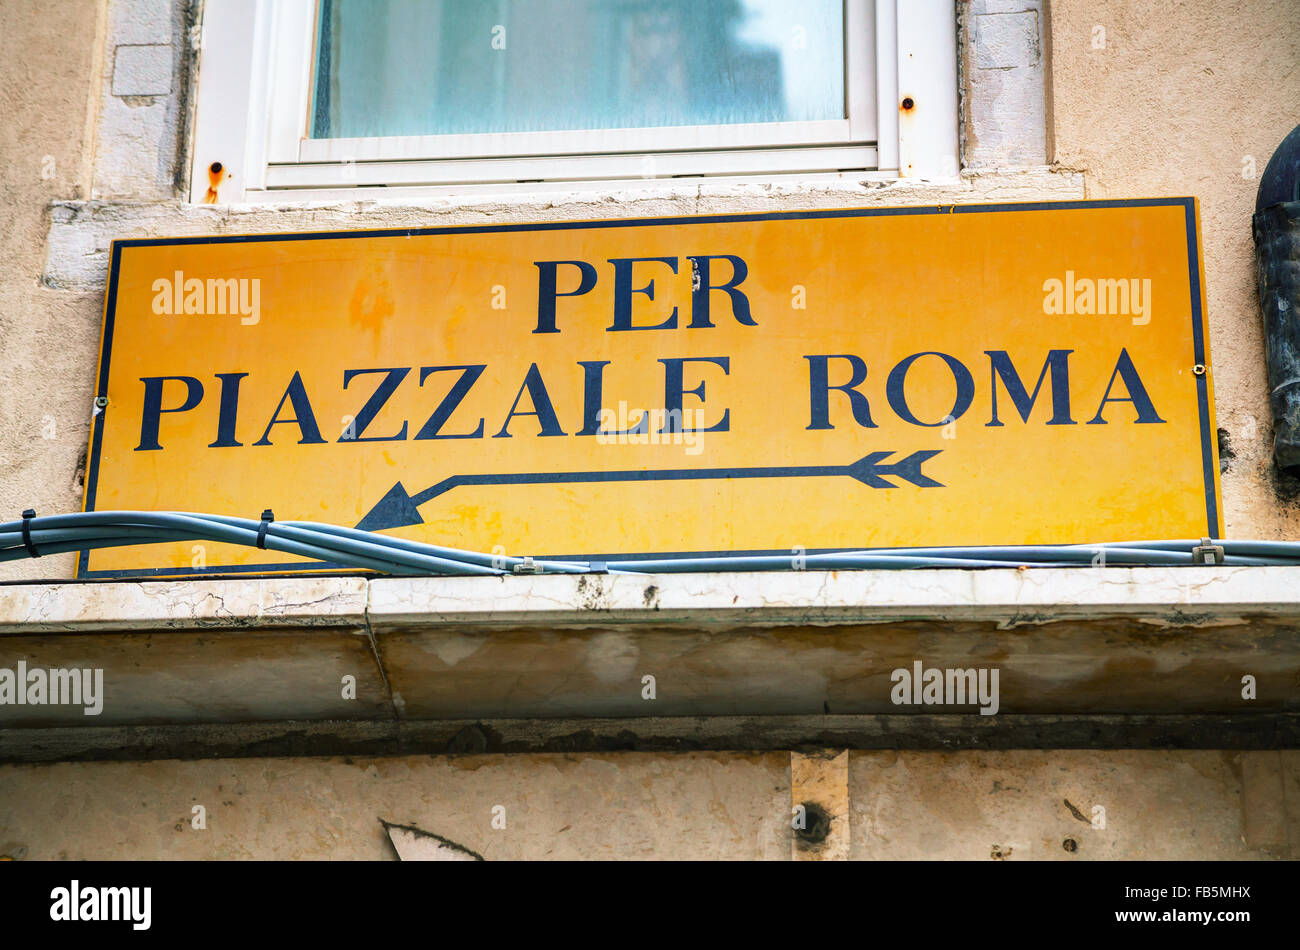 Piazzale Roma direction sign in Venice, Italy Stock Photo